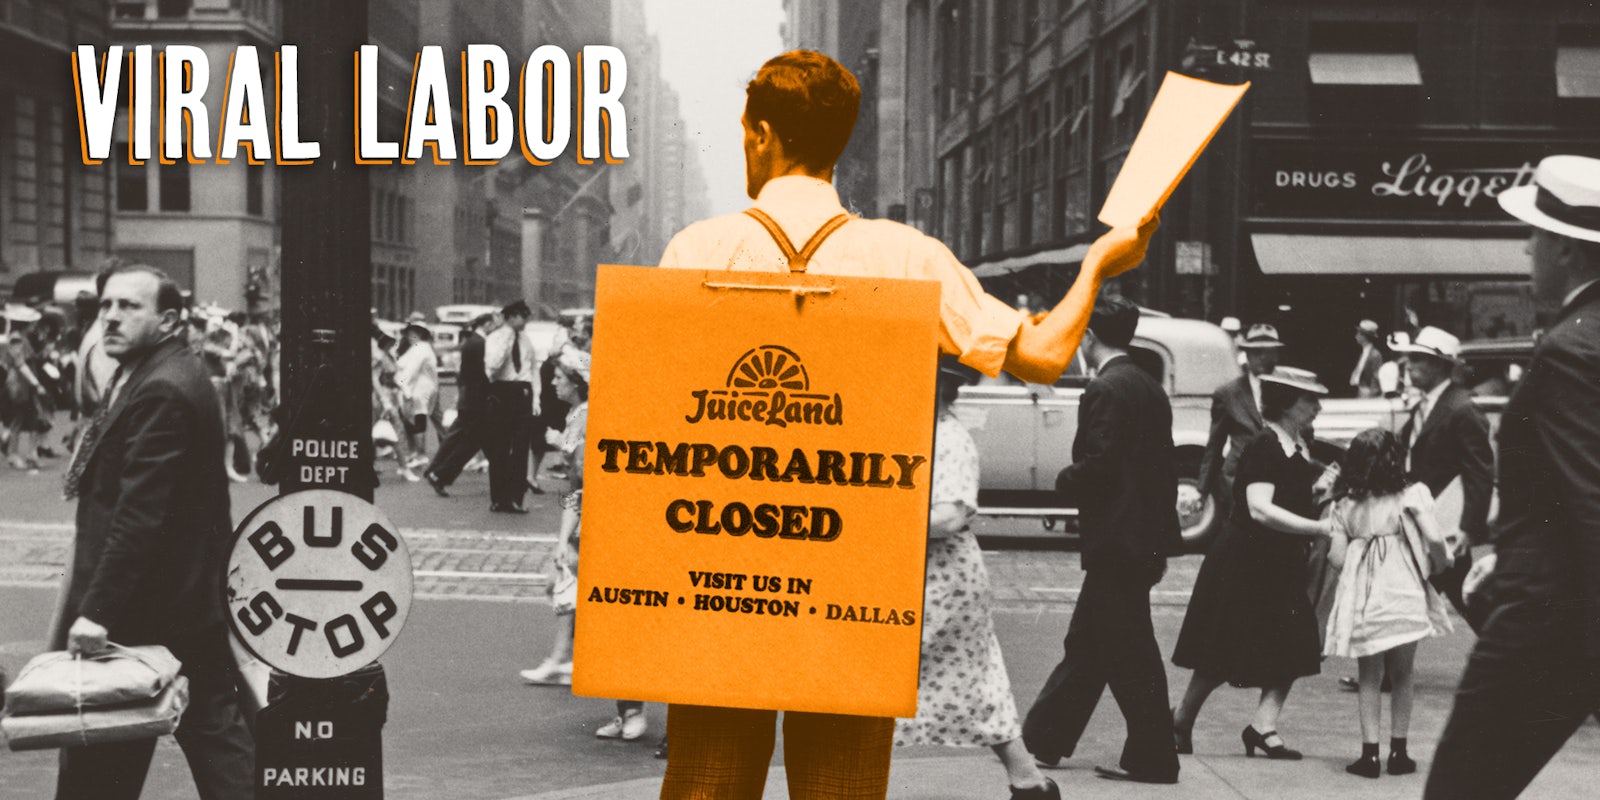 Man on street handing out flyers while wearing a clapboard that says 'JuiceLand temporarily closed. Visit us in Austin, Houston, Dallas.' Caption 'VIRAL LABOR'